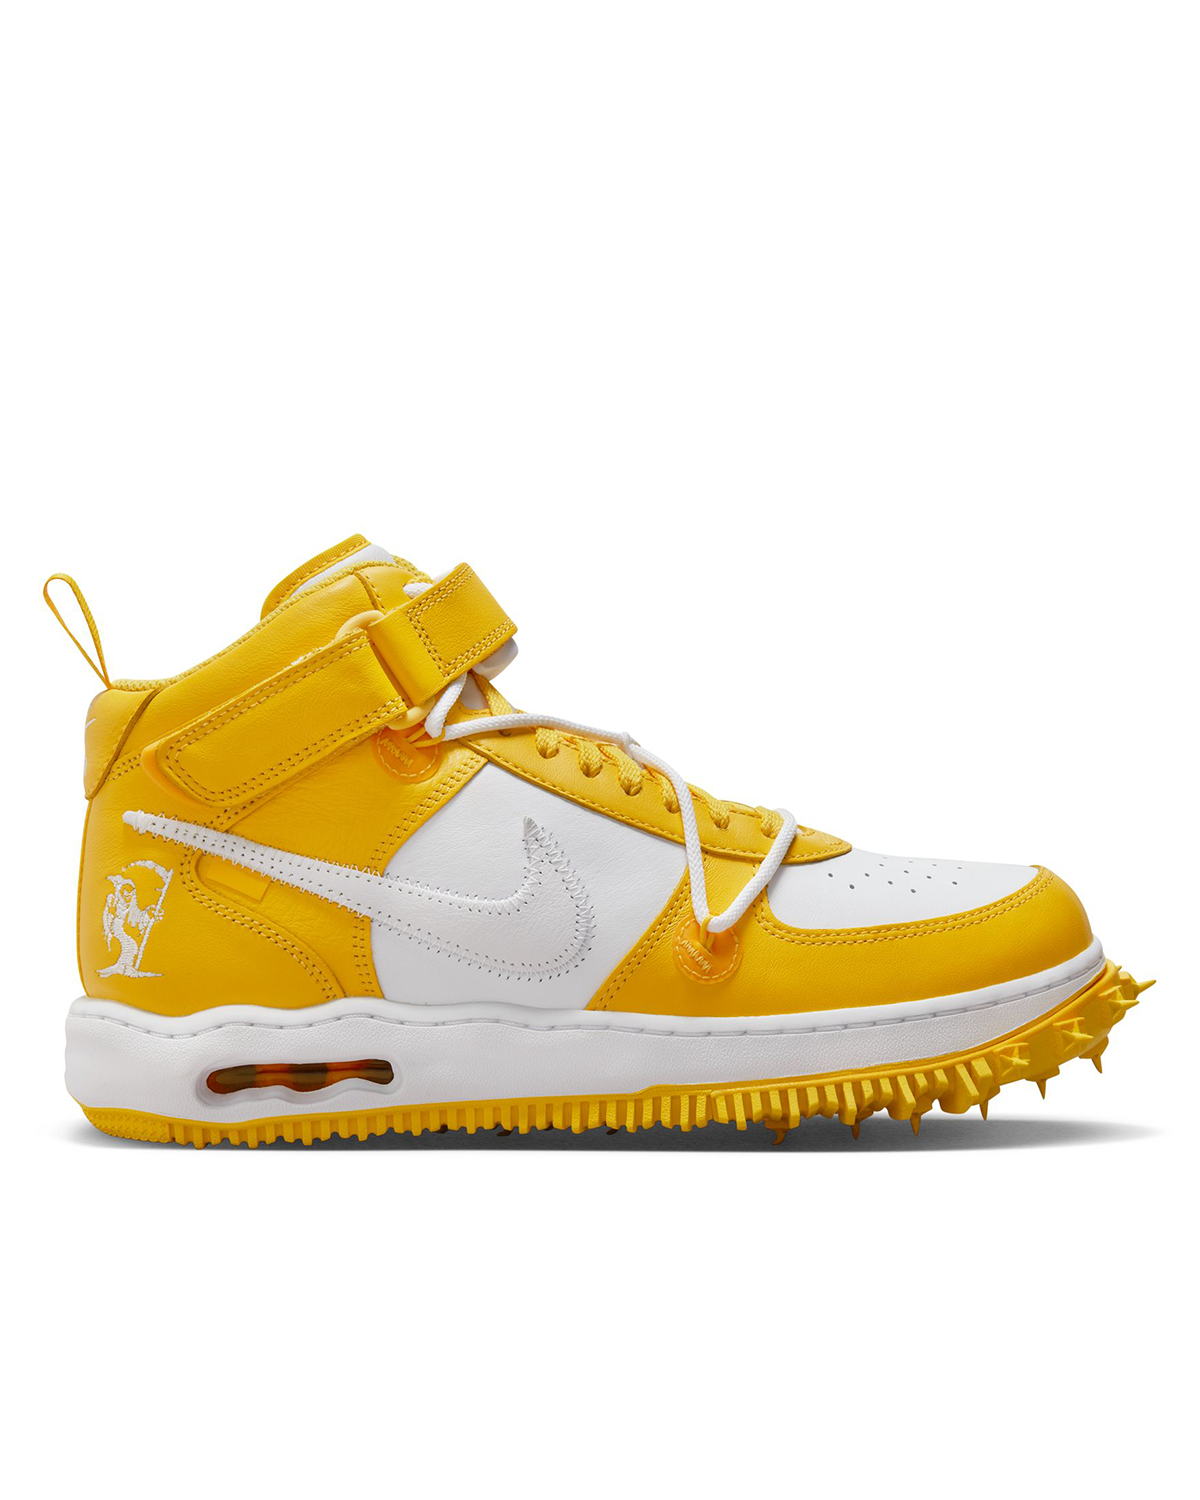 Off-White x Air Force 1 Mid White/Varsity Maize